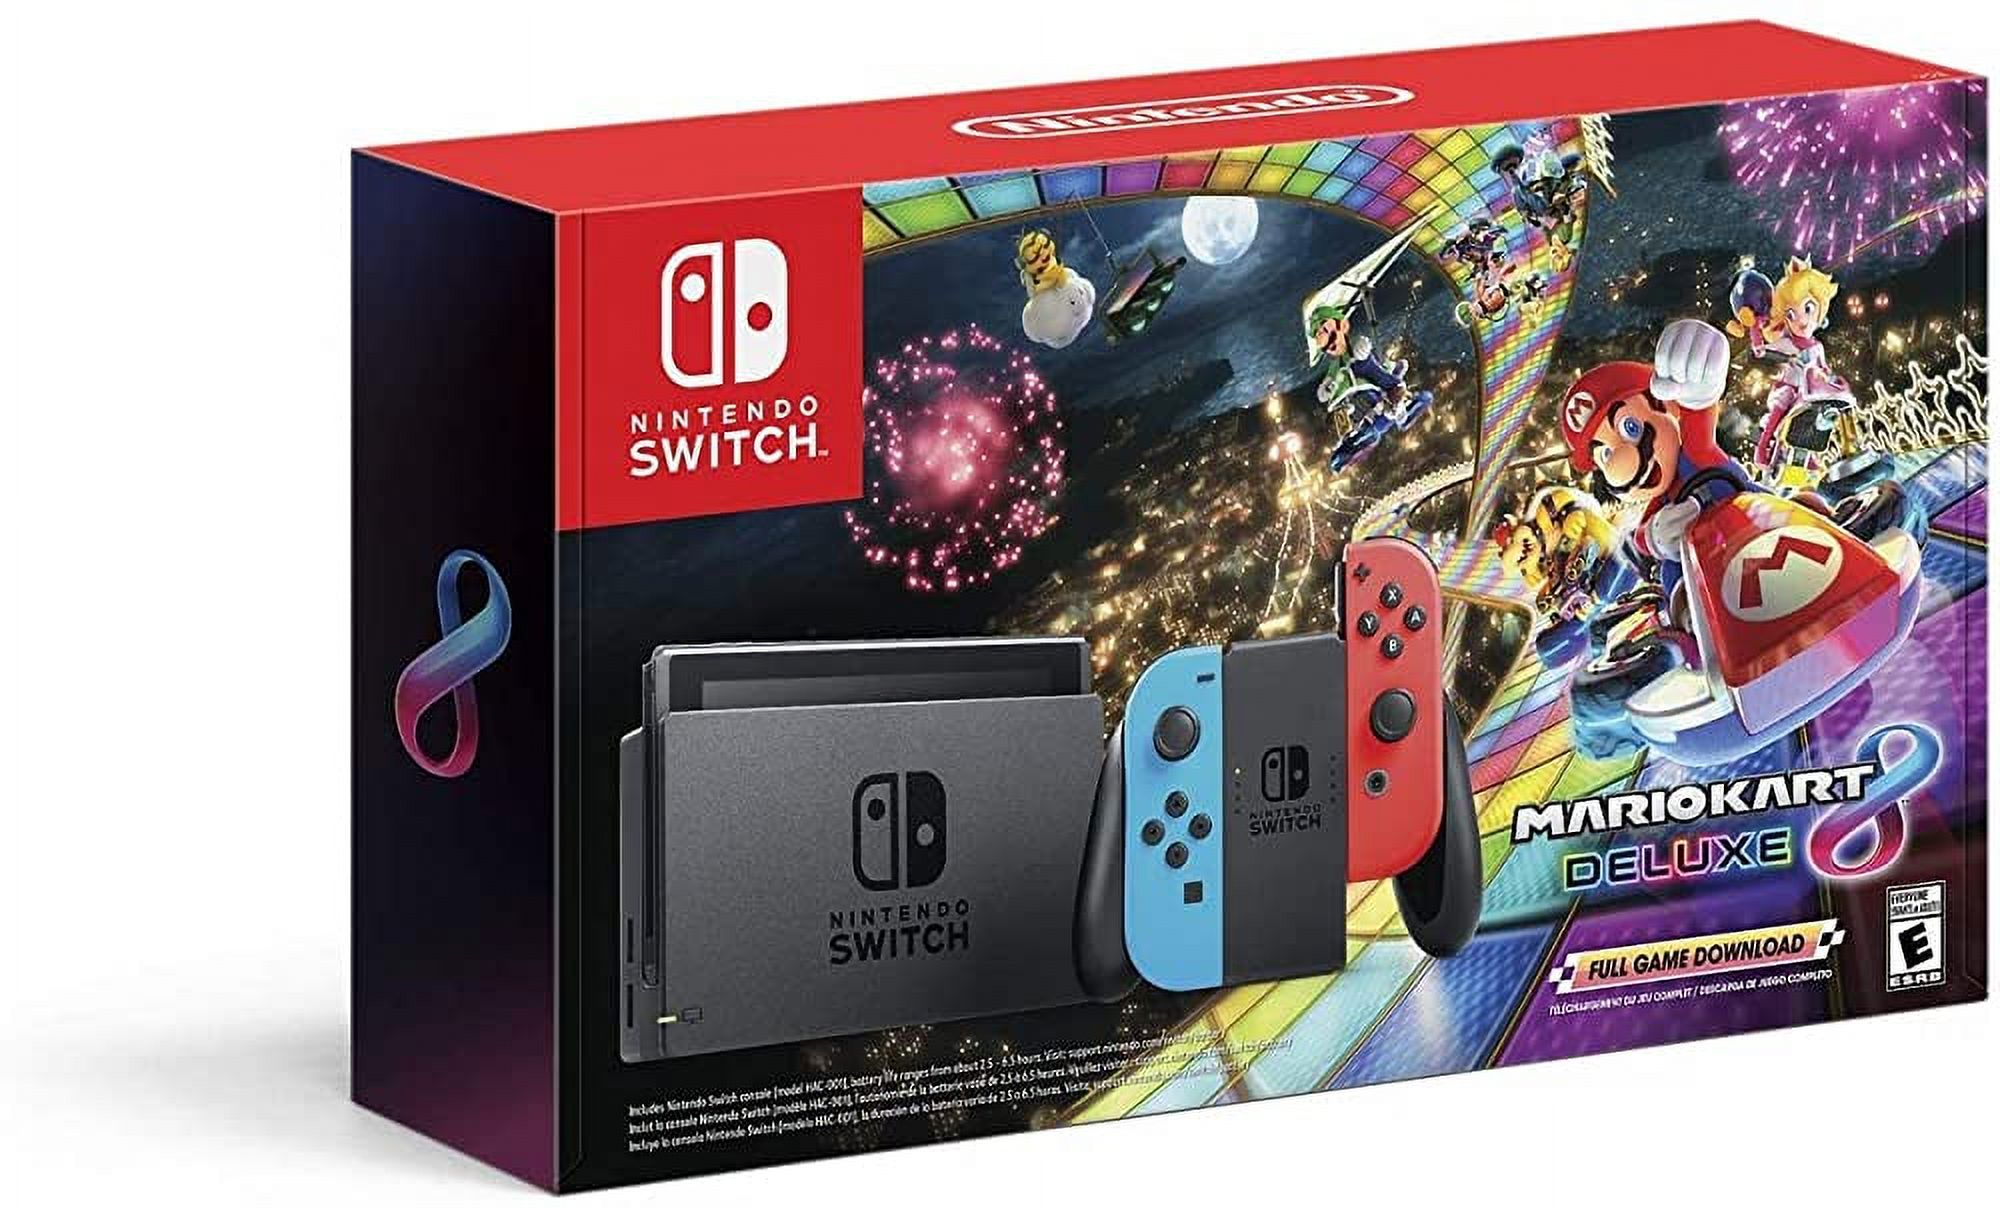 Nintendo Switch Bundle with Mario Kart 8 Deluxe - Neon Red/Blue - image 1 of 2